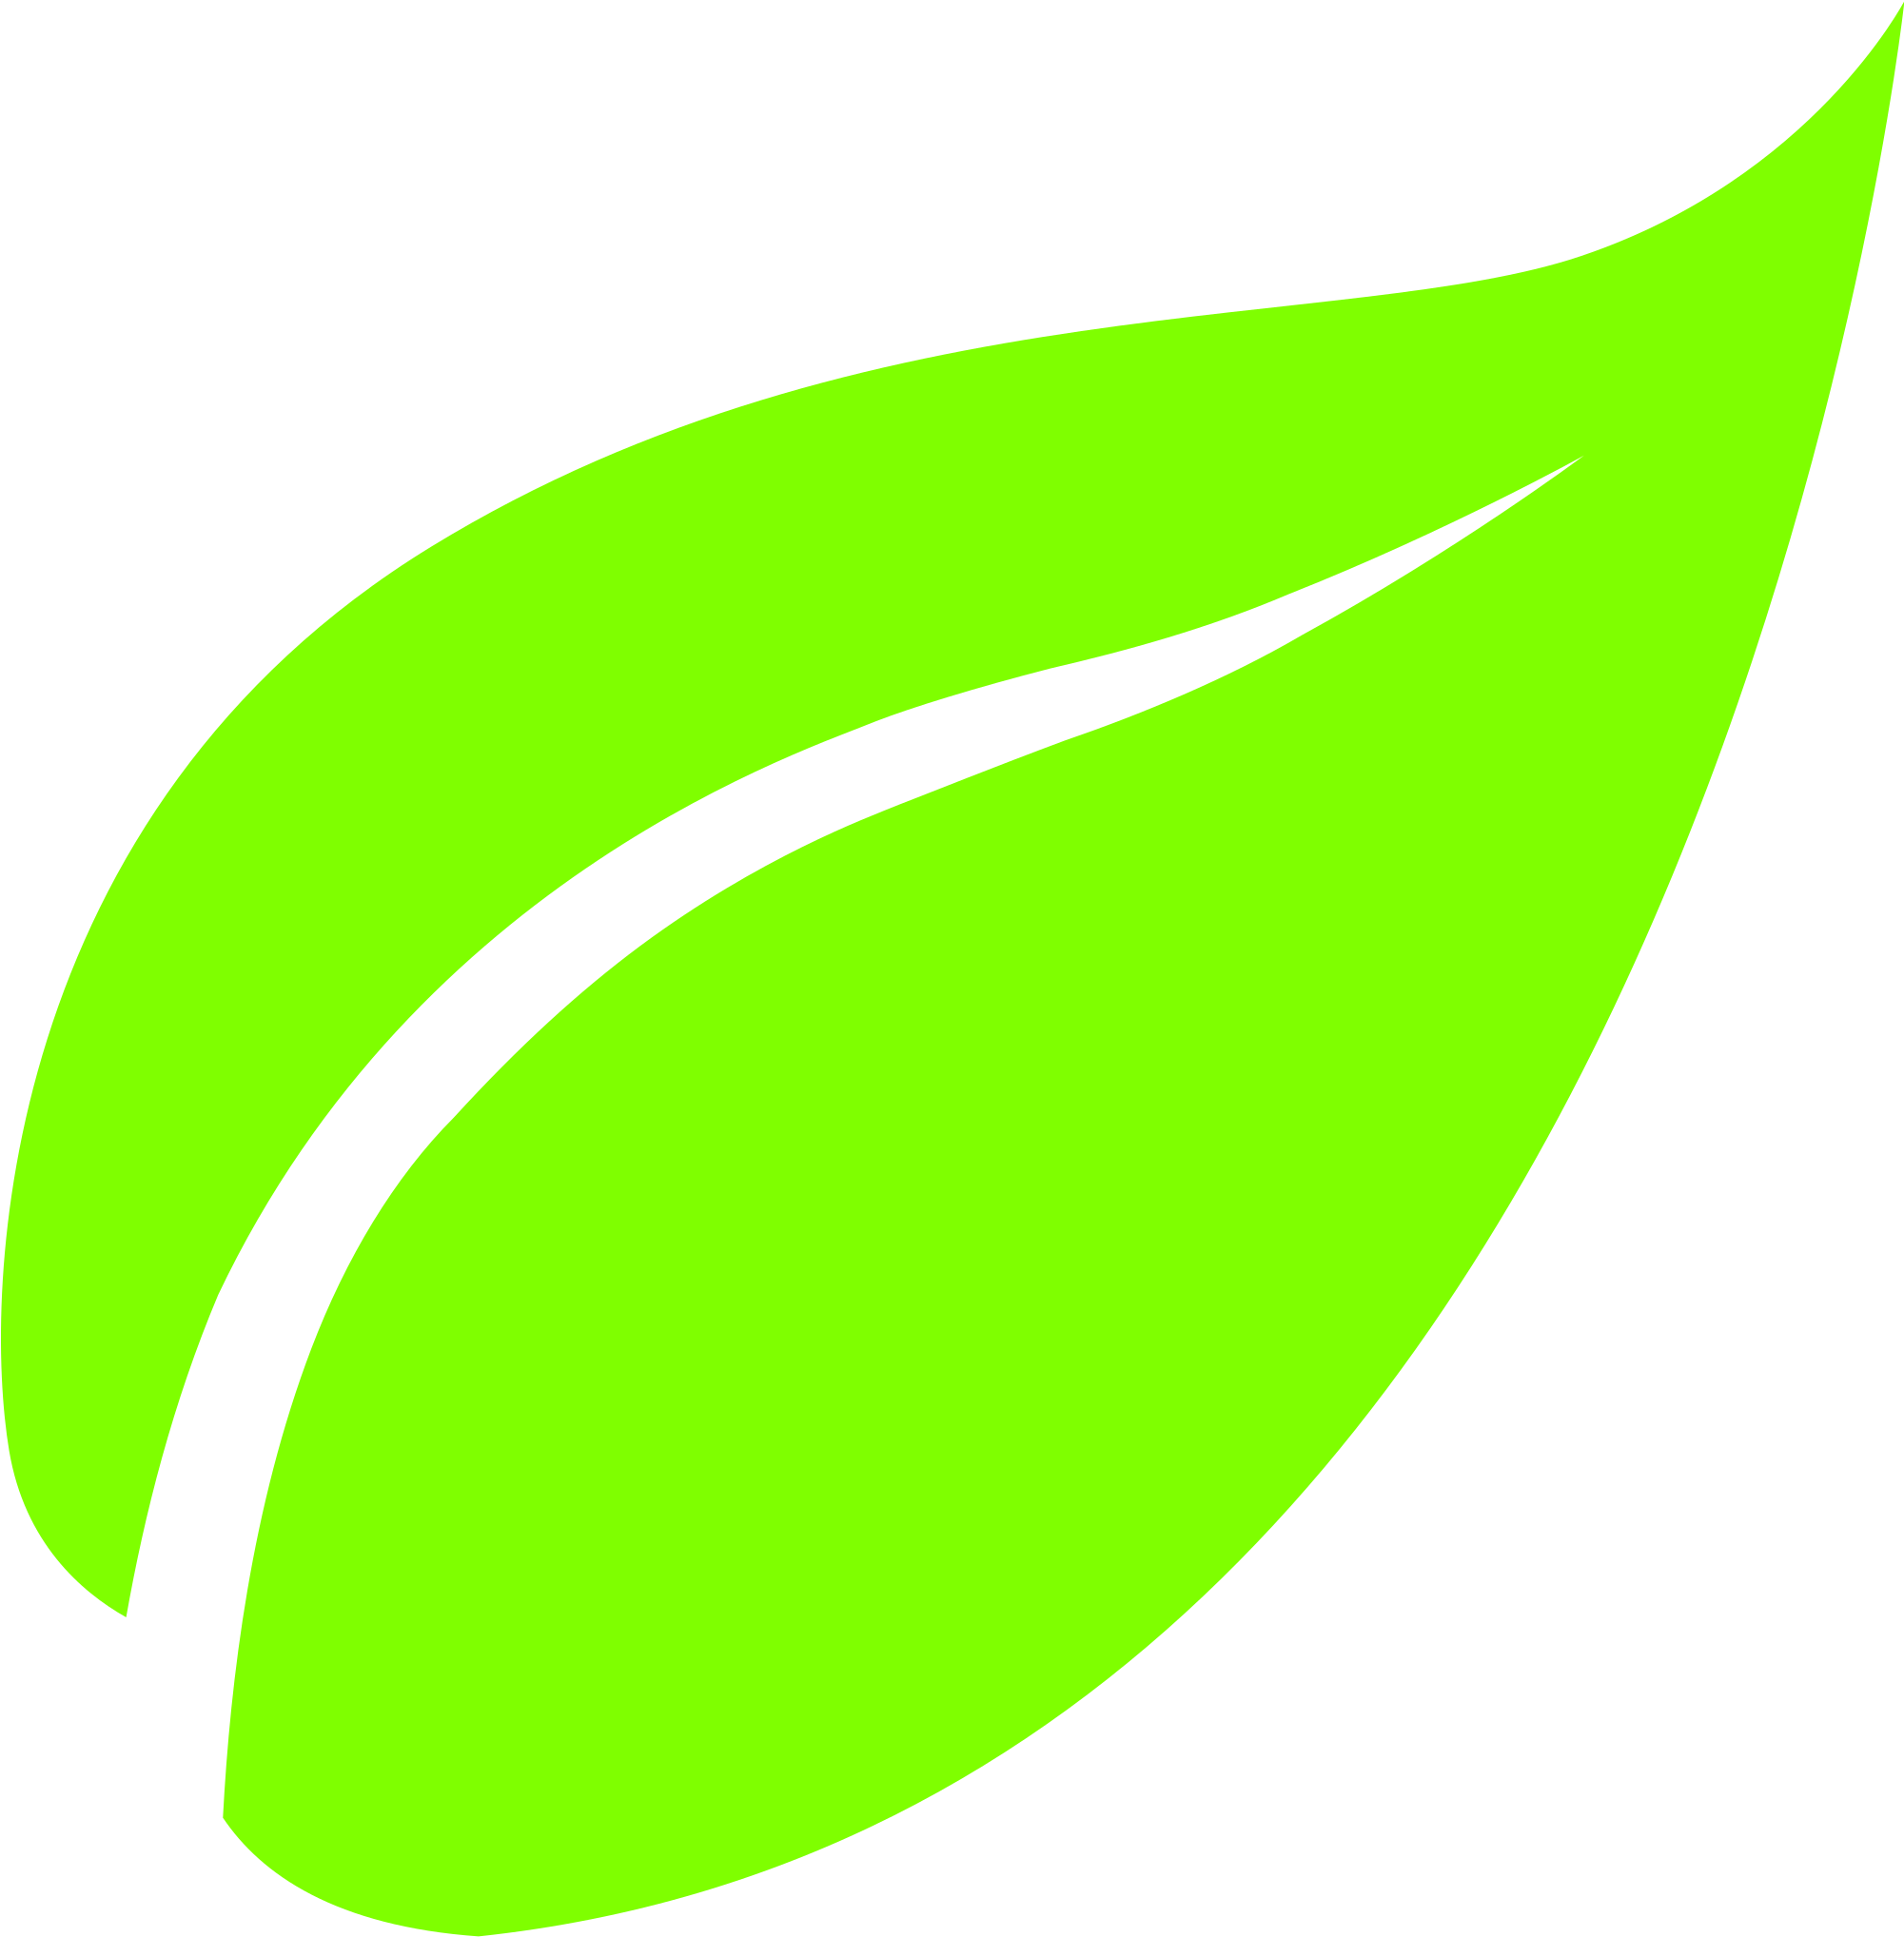 A Green Leaf With Black Lines